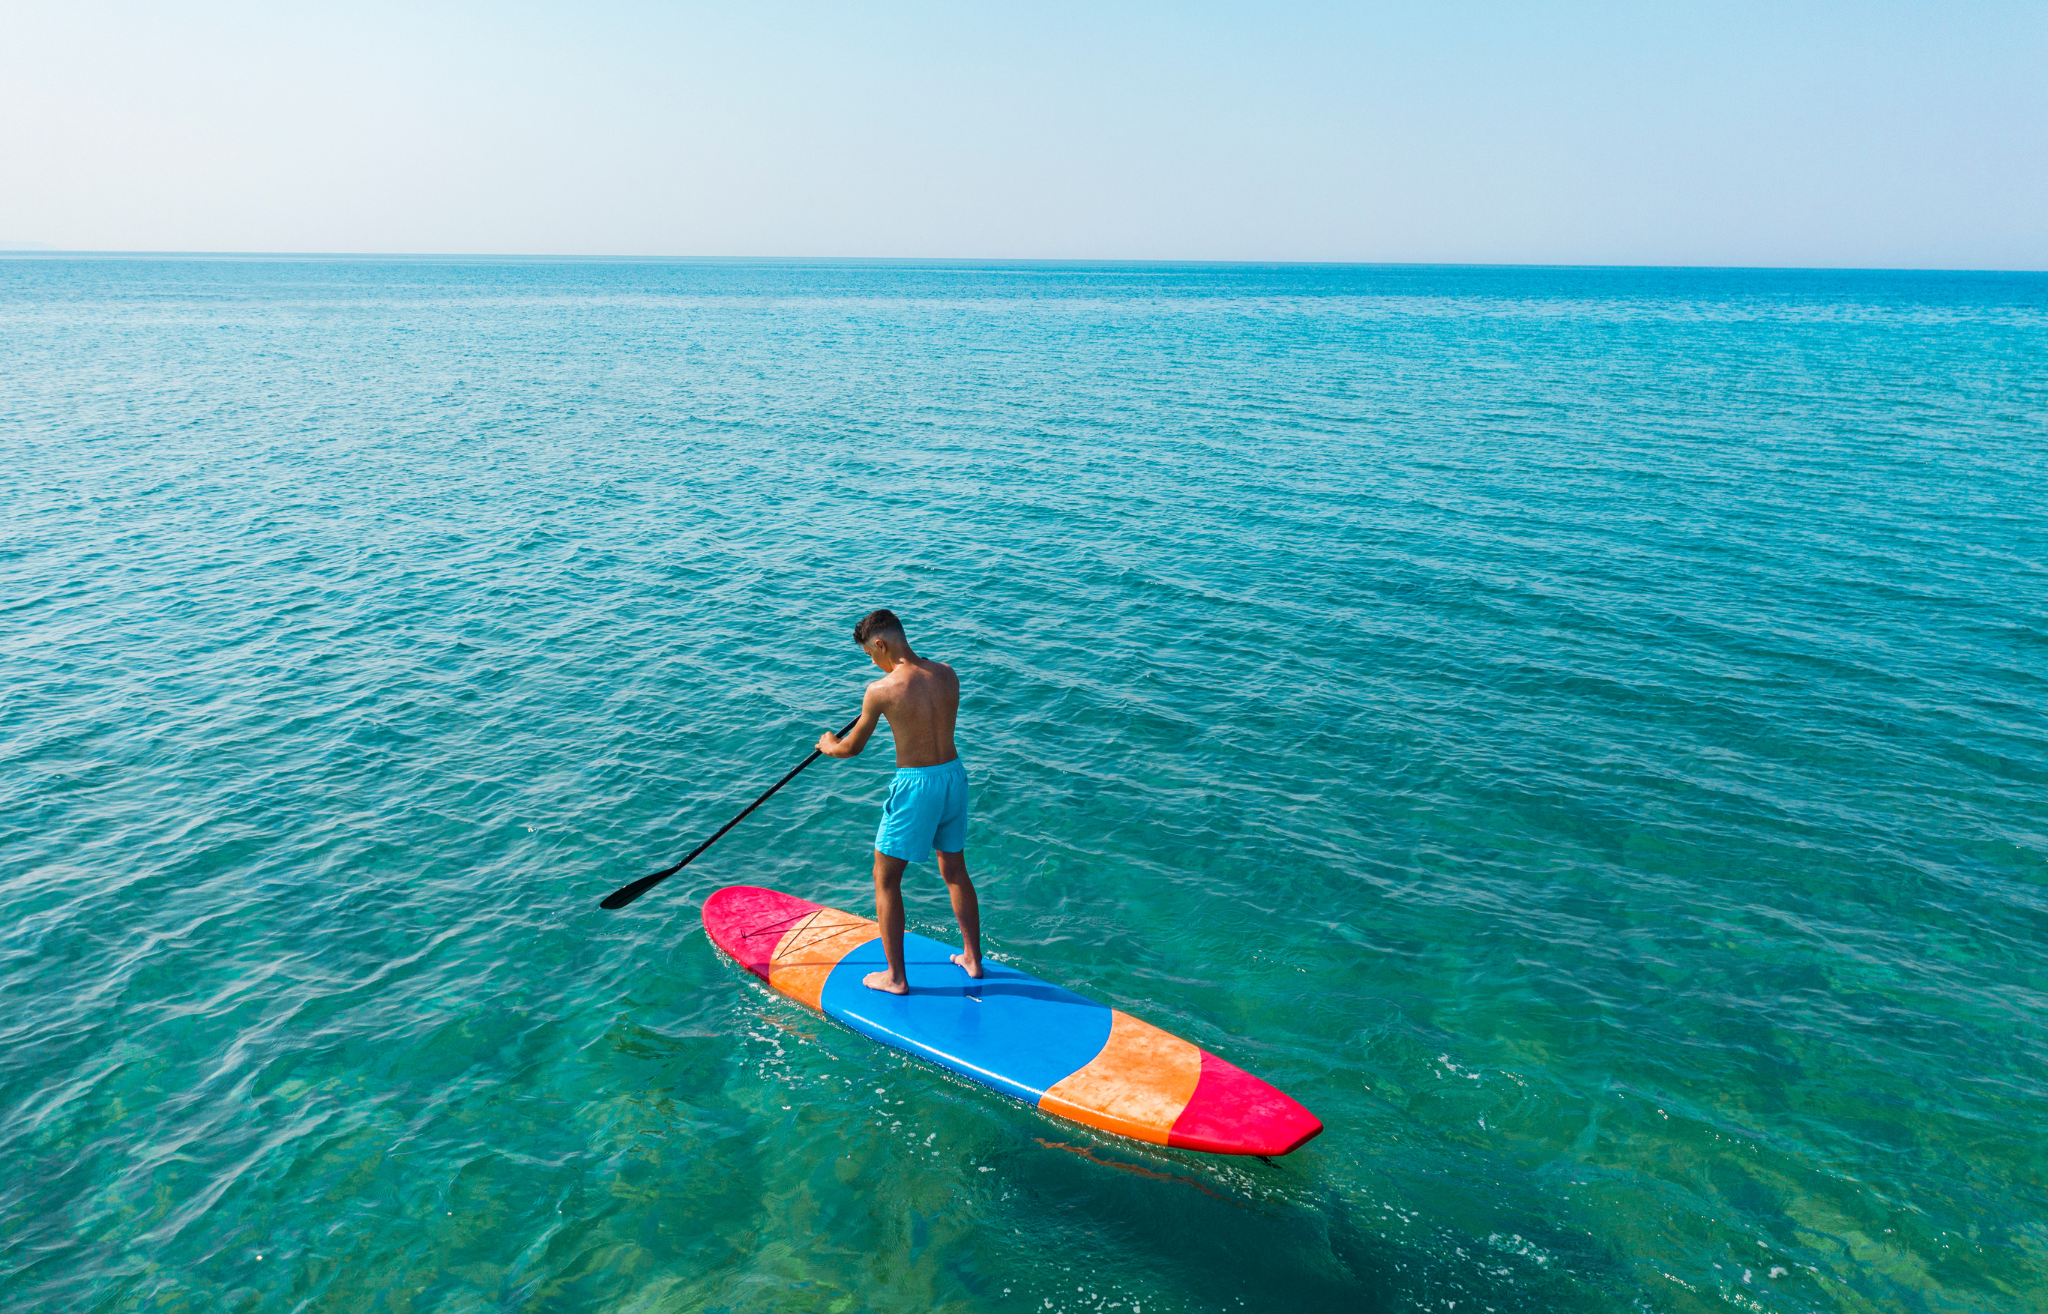 Man stand up paddle boarding in beautiful blue-green calm water - Adventure Wise Travel Gear